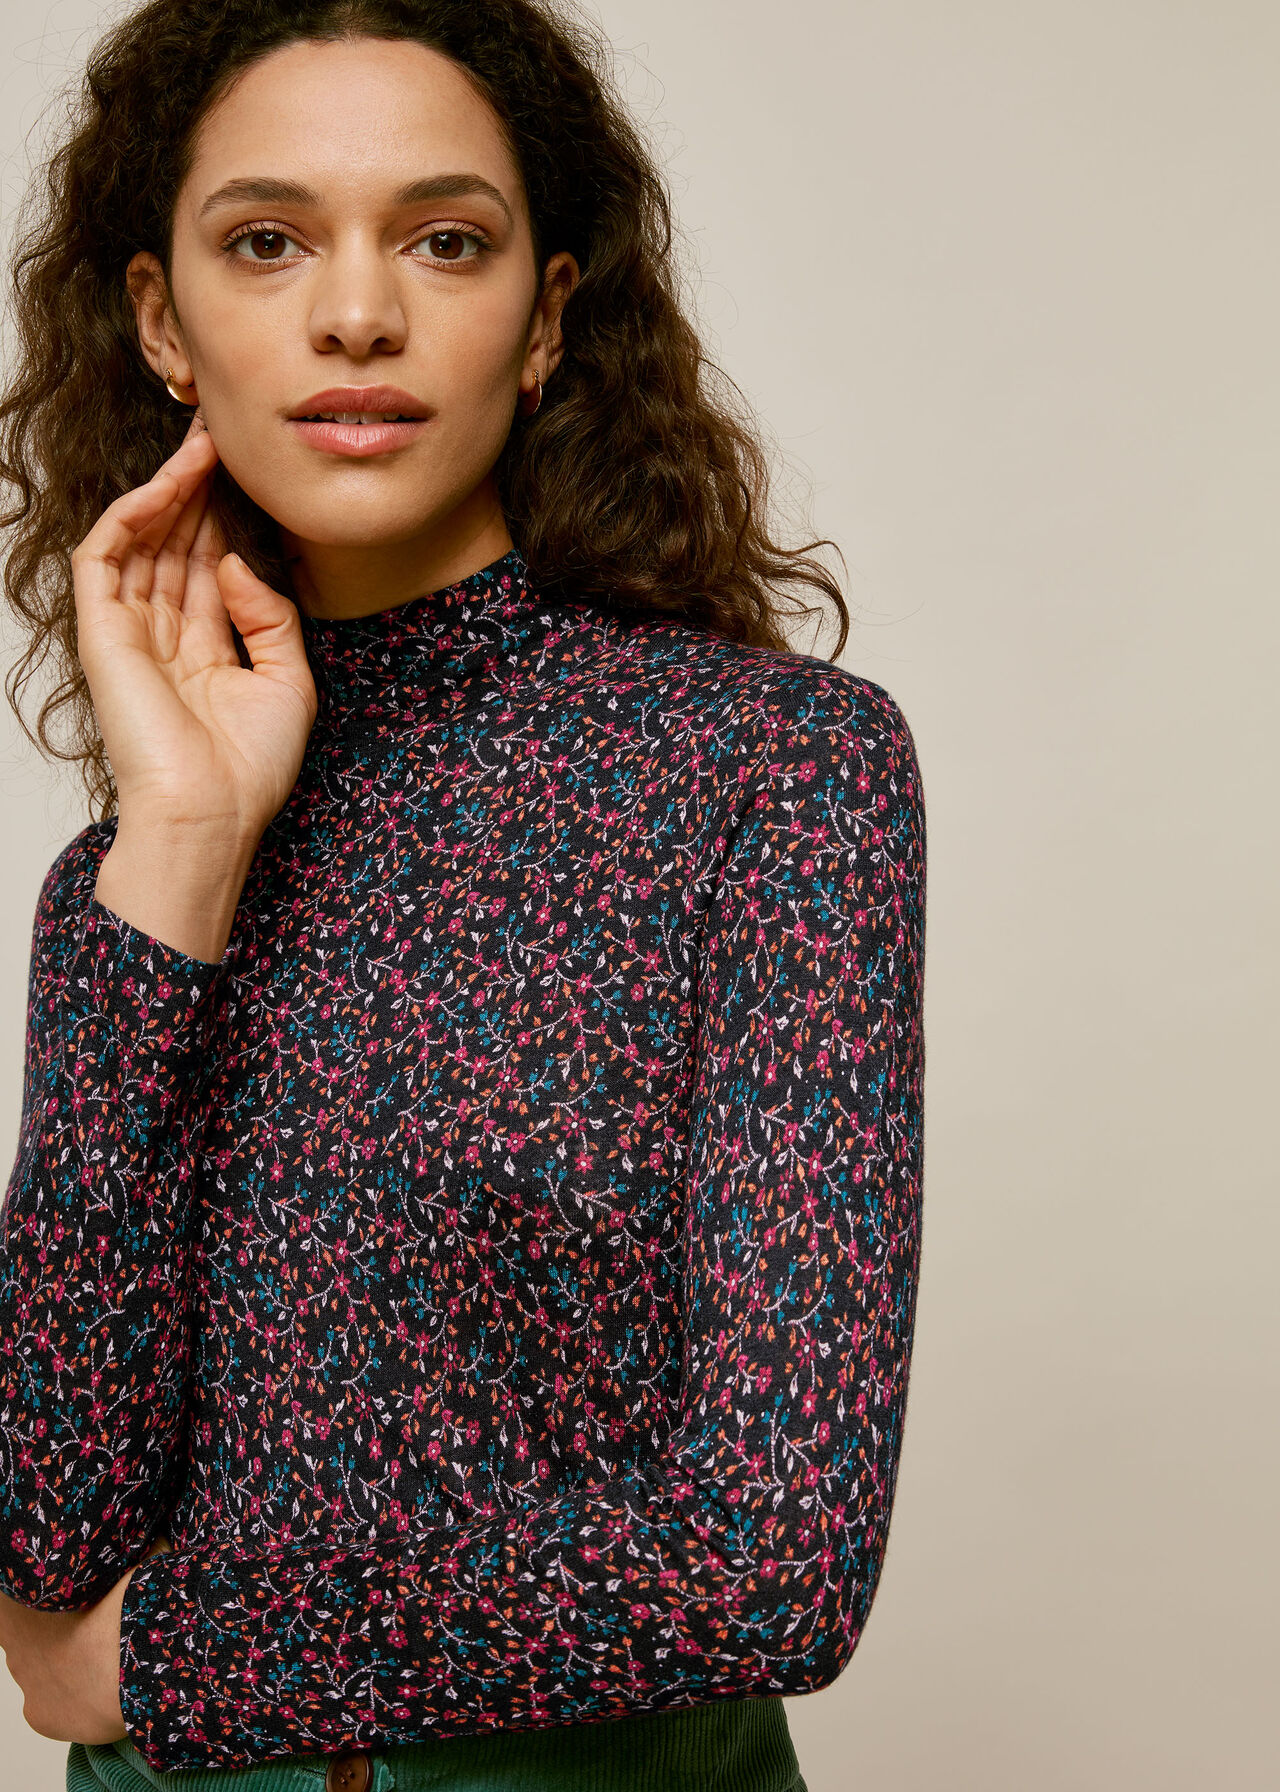 Star Print Floral Wool Mix Top Multicolour